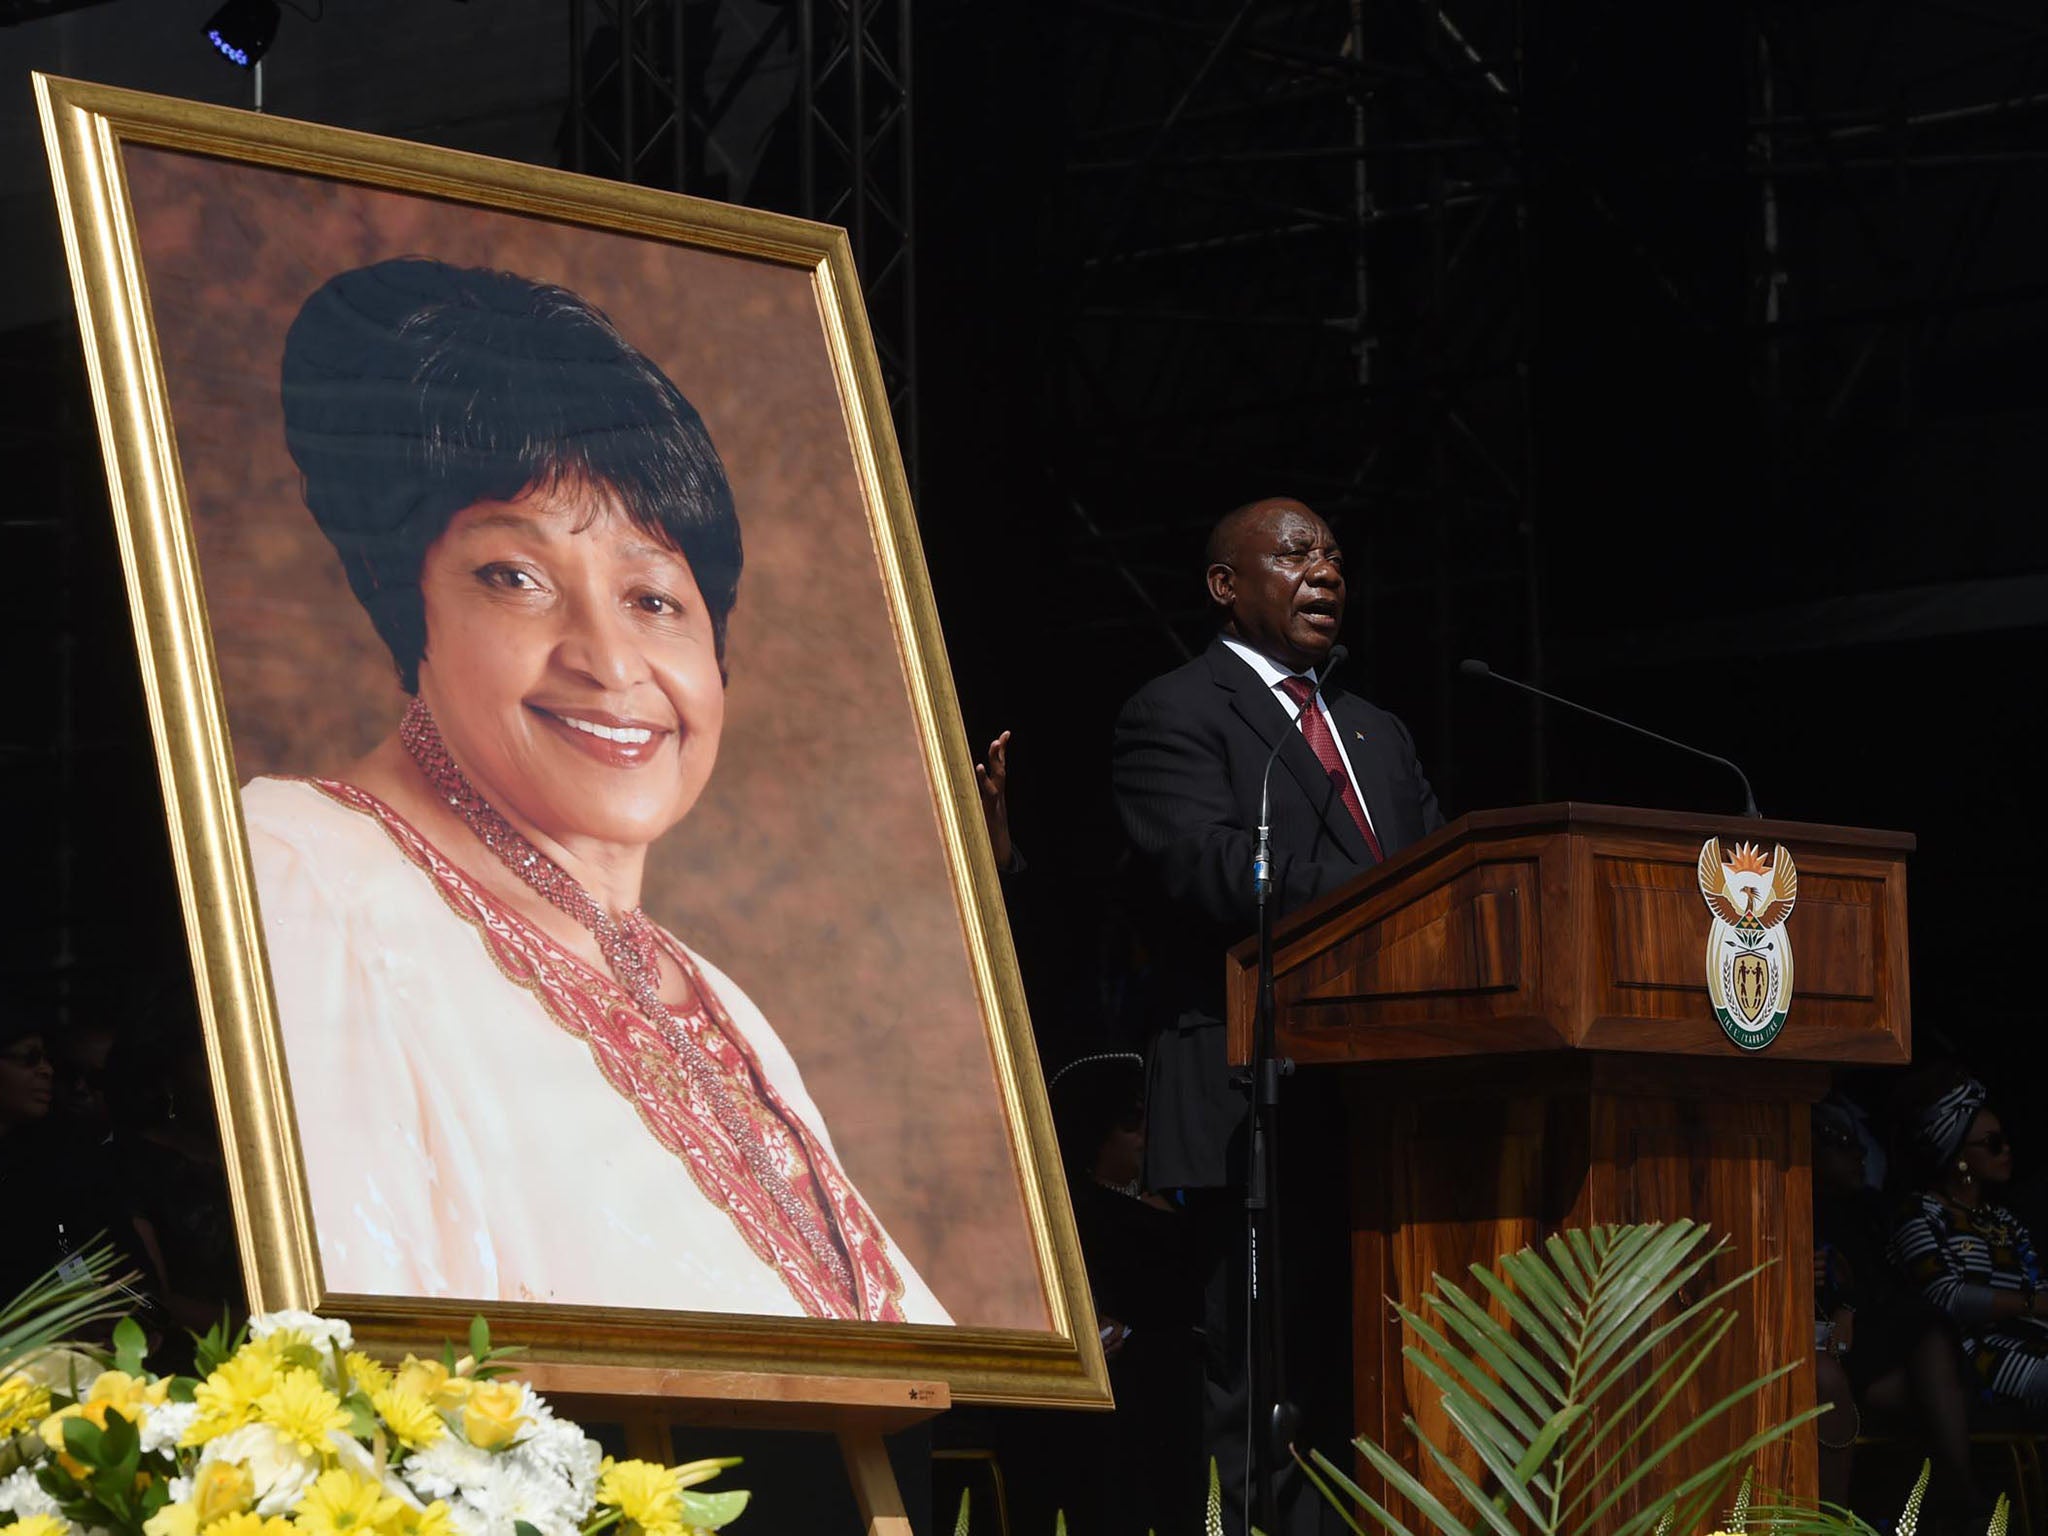 South African president Cyril Ramaphosa delivers the Eulogy at Winnie Madikizela-Mandela’s funeral